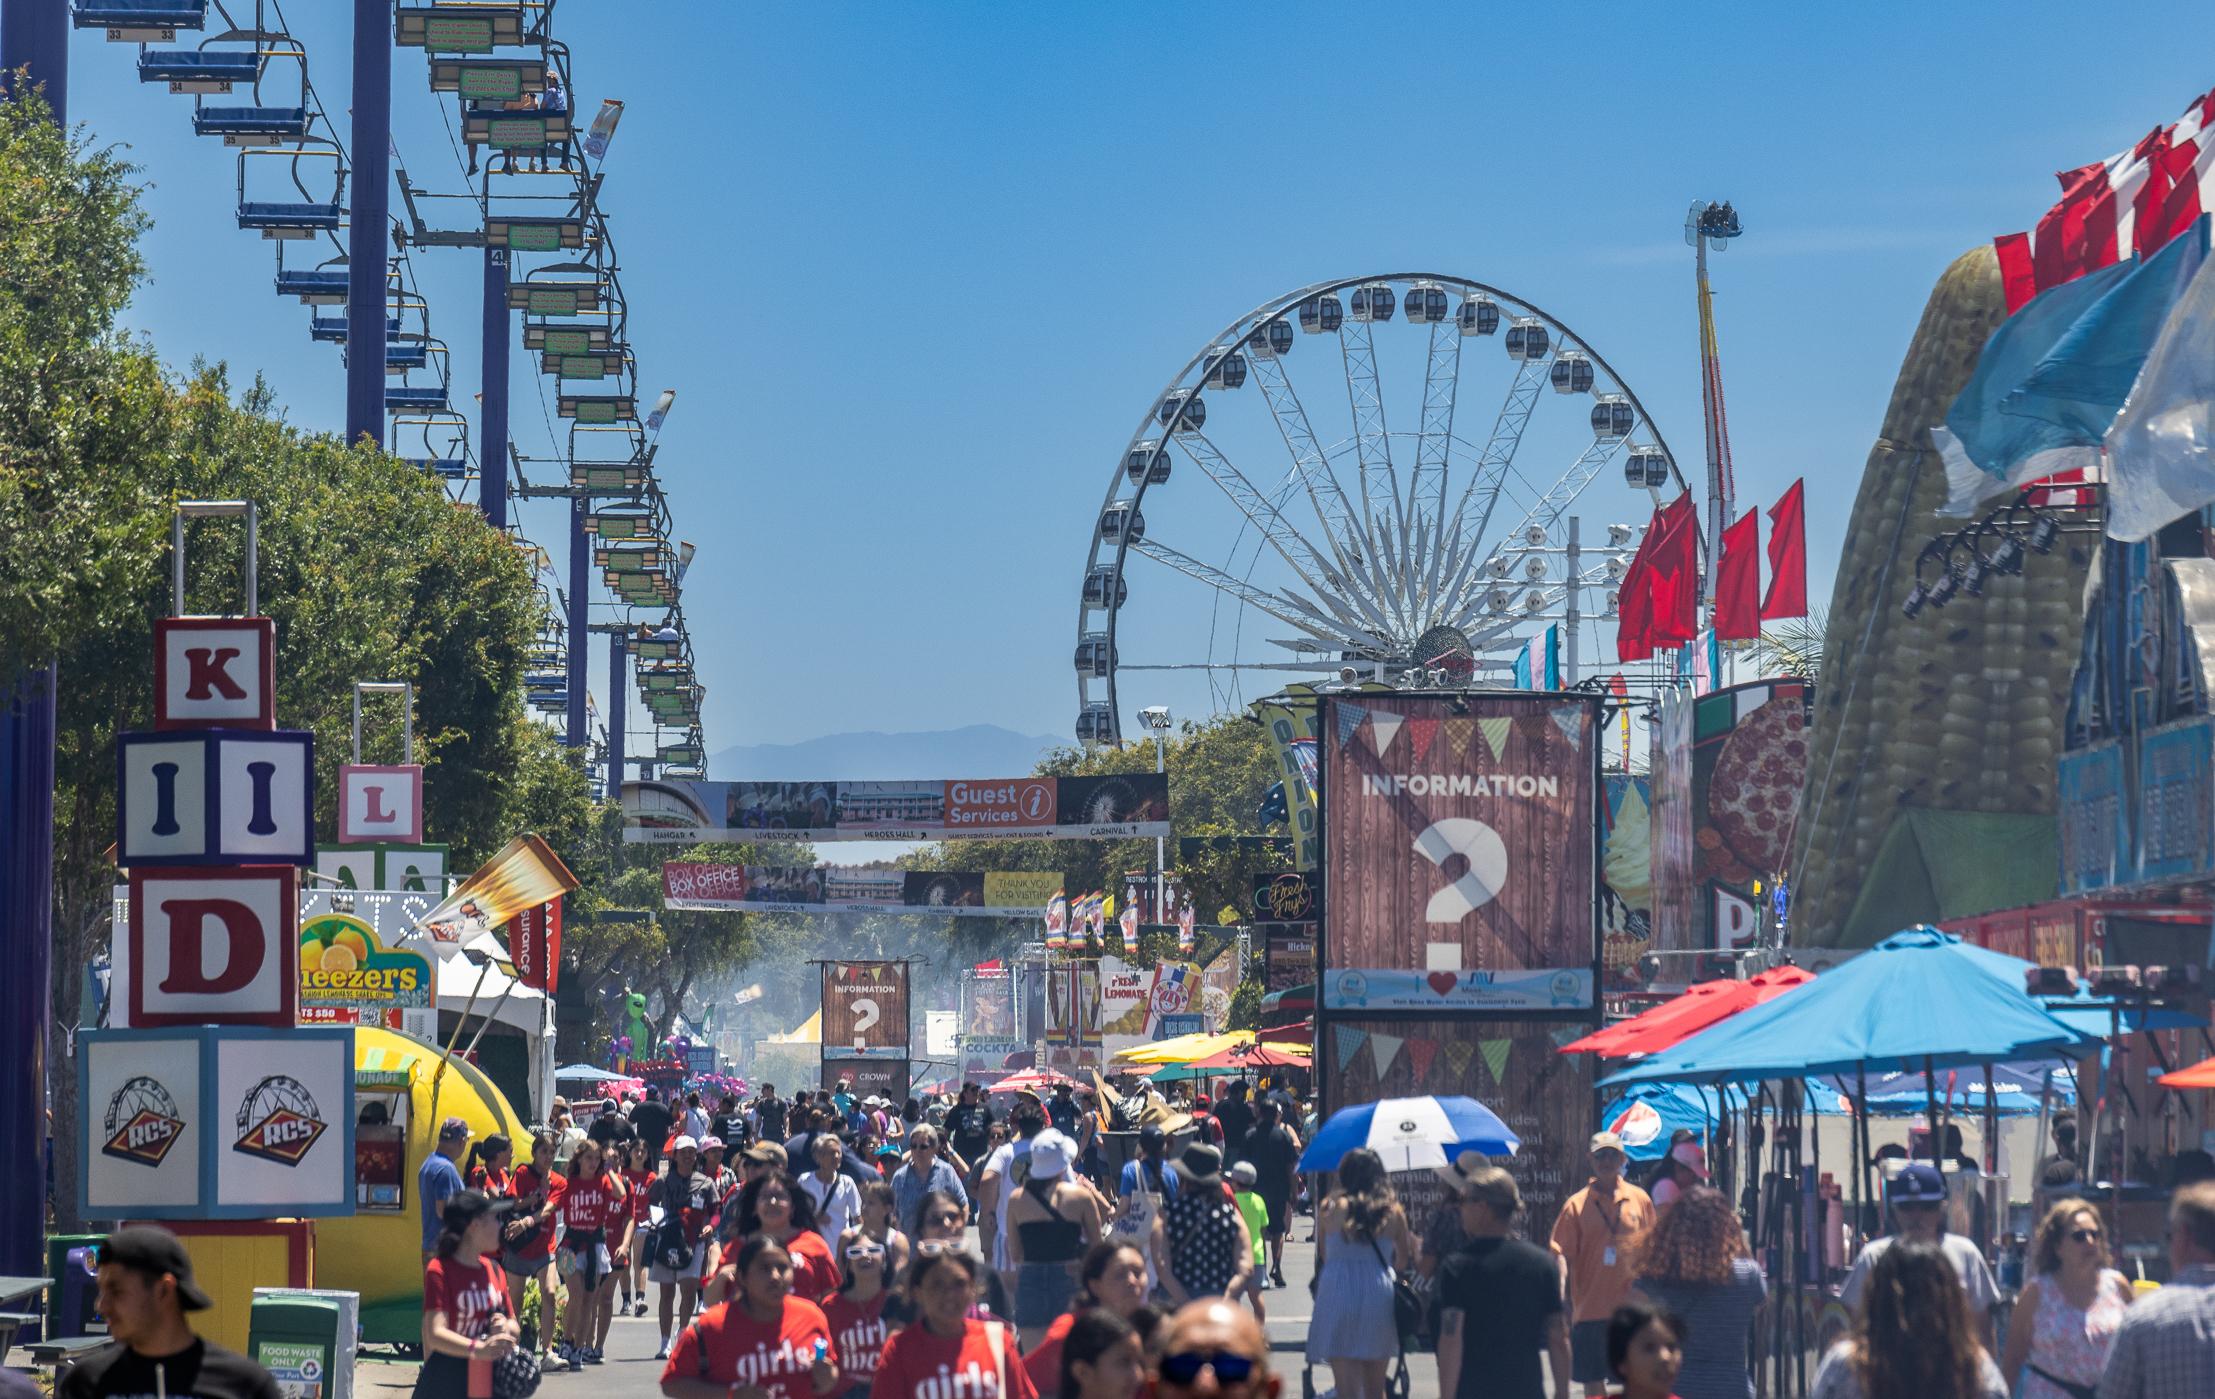 OC Fair Opens With Several New Treats and Attractions